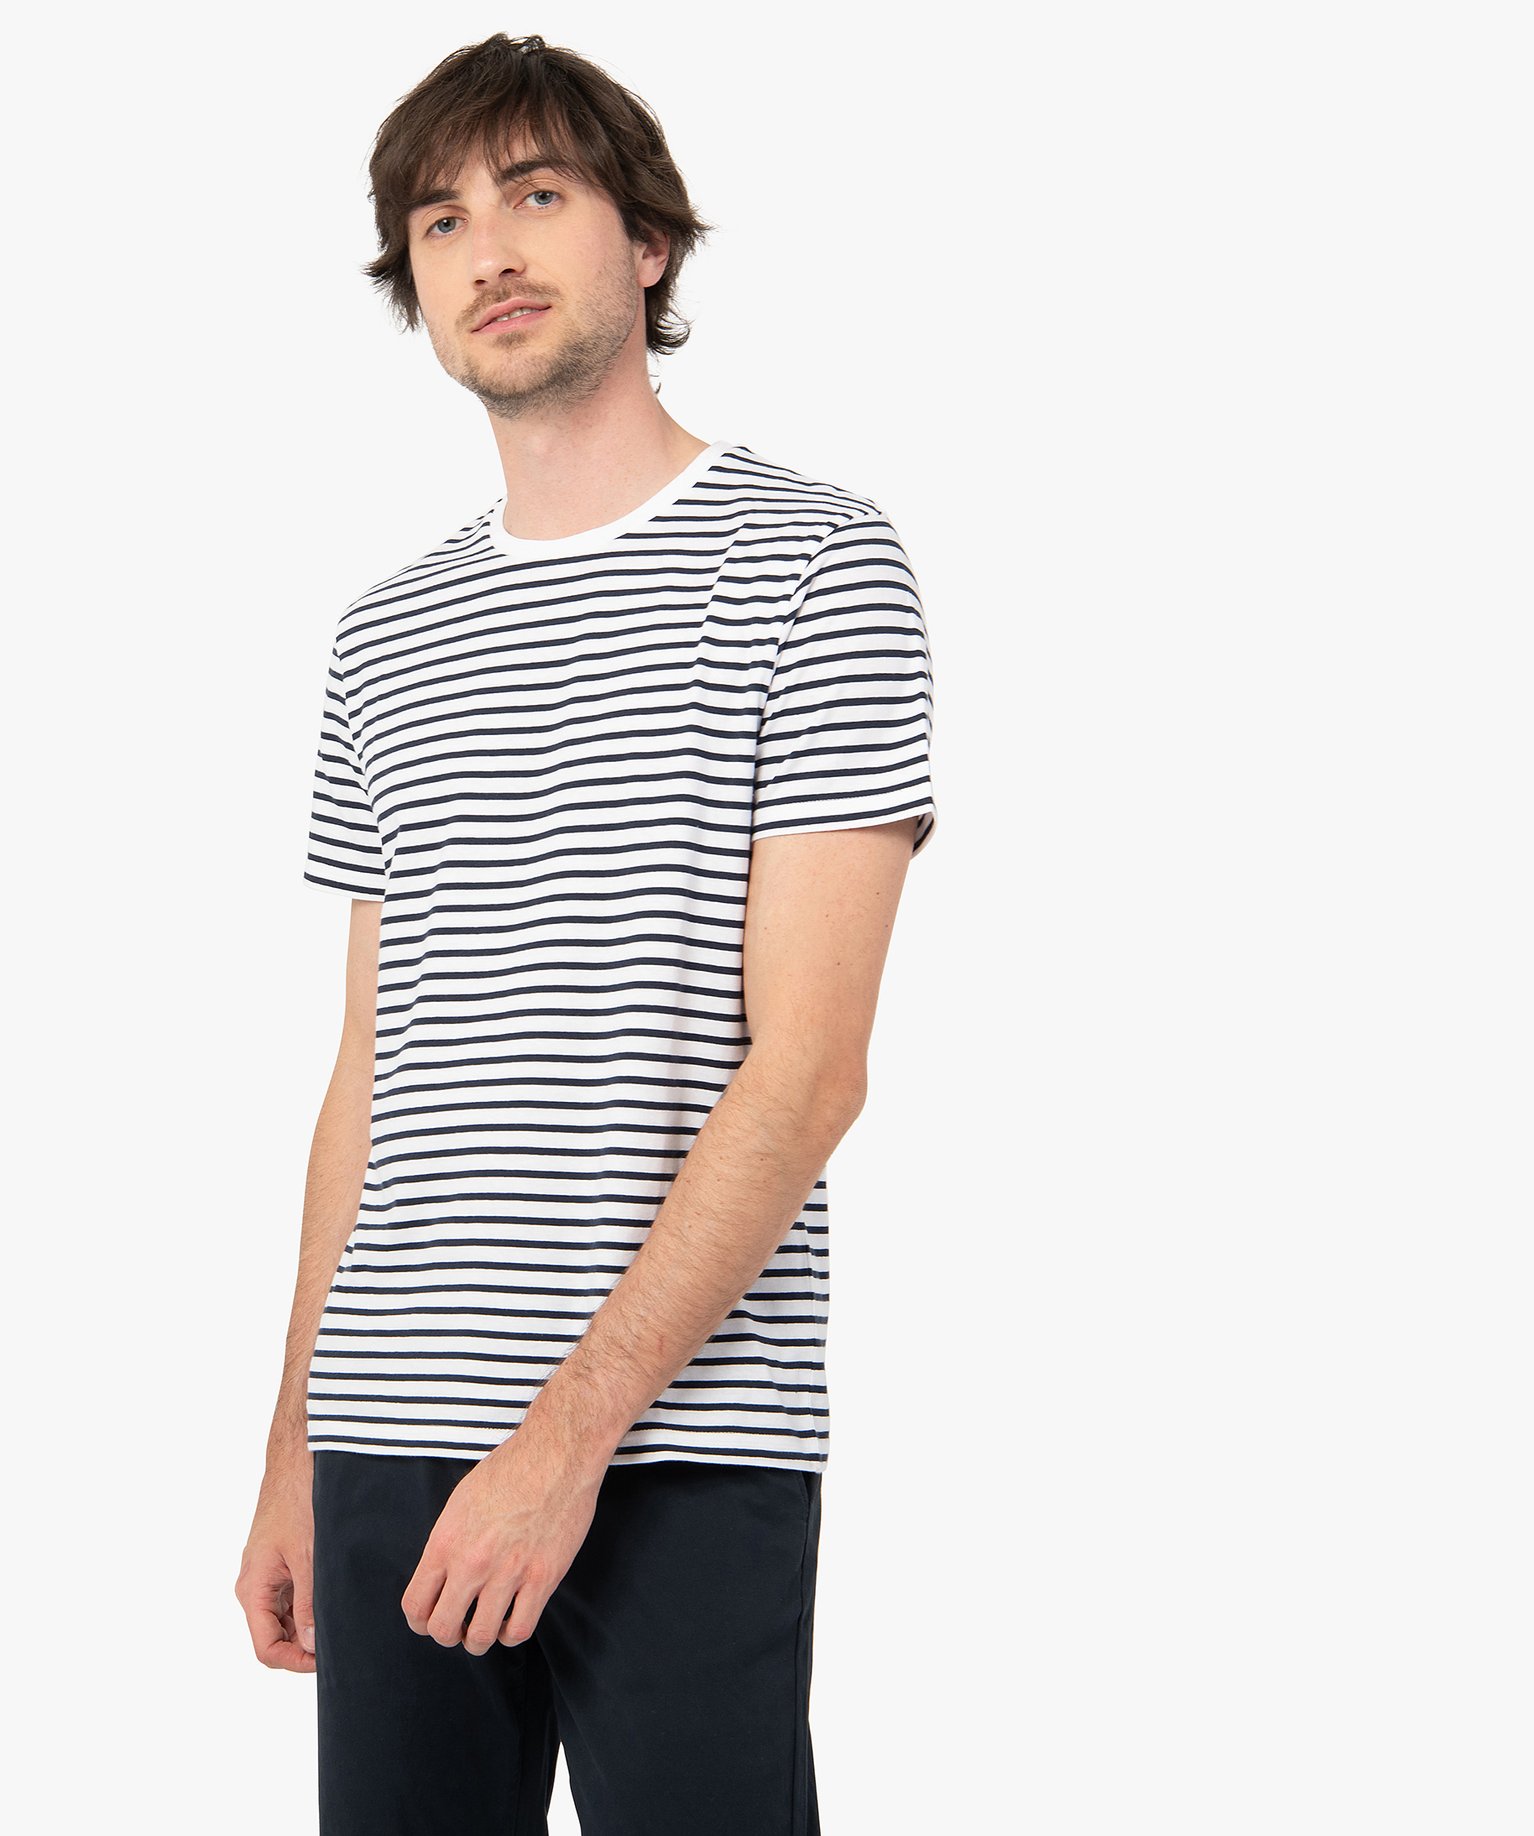 tee-shirt homme a manches courtes et rayures marinieres imprime tee-shirts